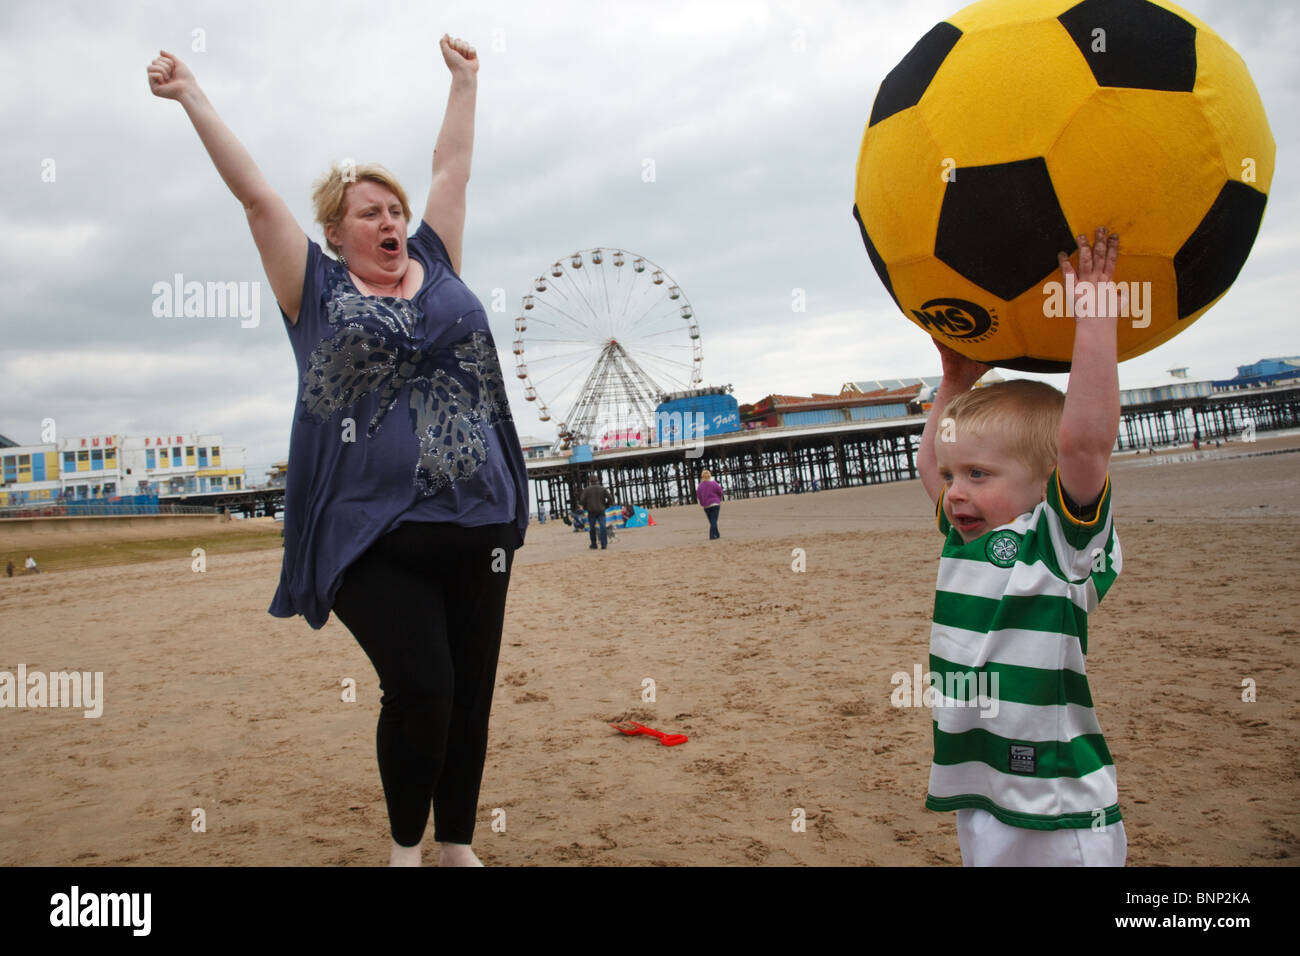 A little boy dressed in a football uniform with a large ball on the beach in Blackpool, England. Stock Photo